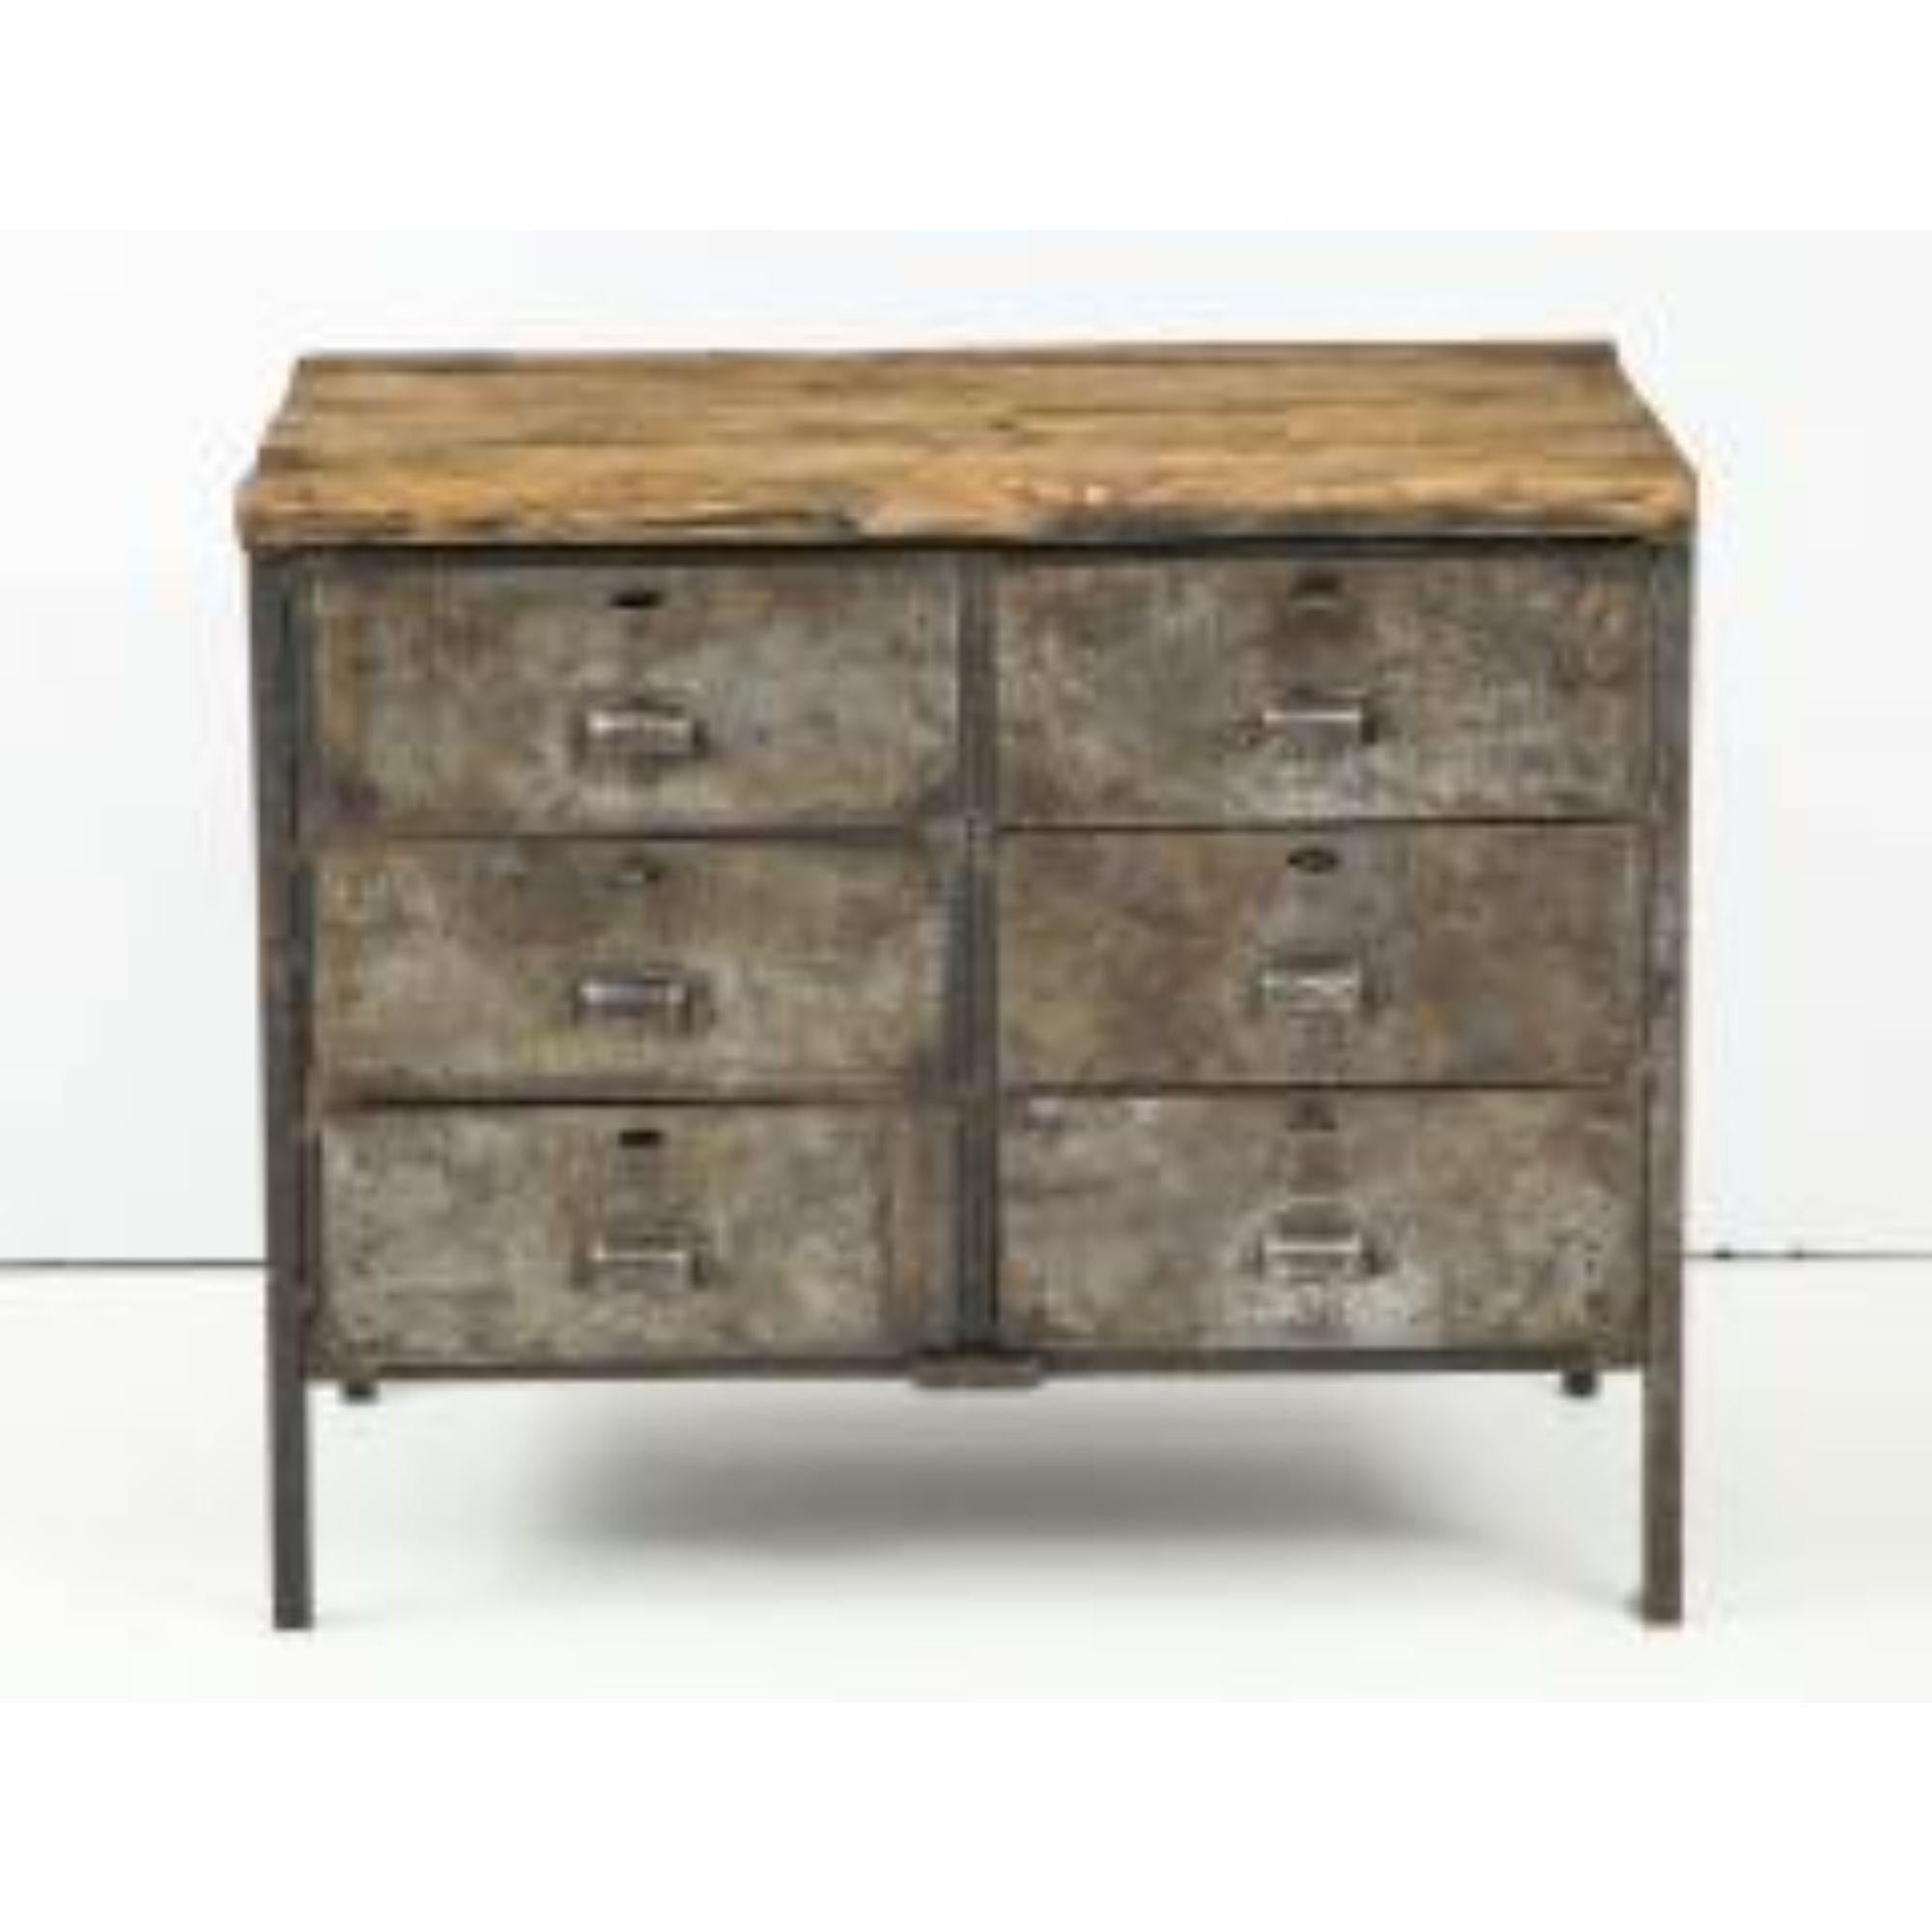 Antique Industrial Metal Chest of Drawers with Chunky Wood Top, circa 1900.

